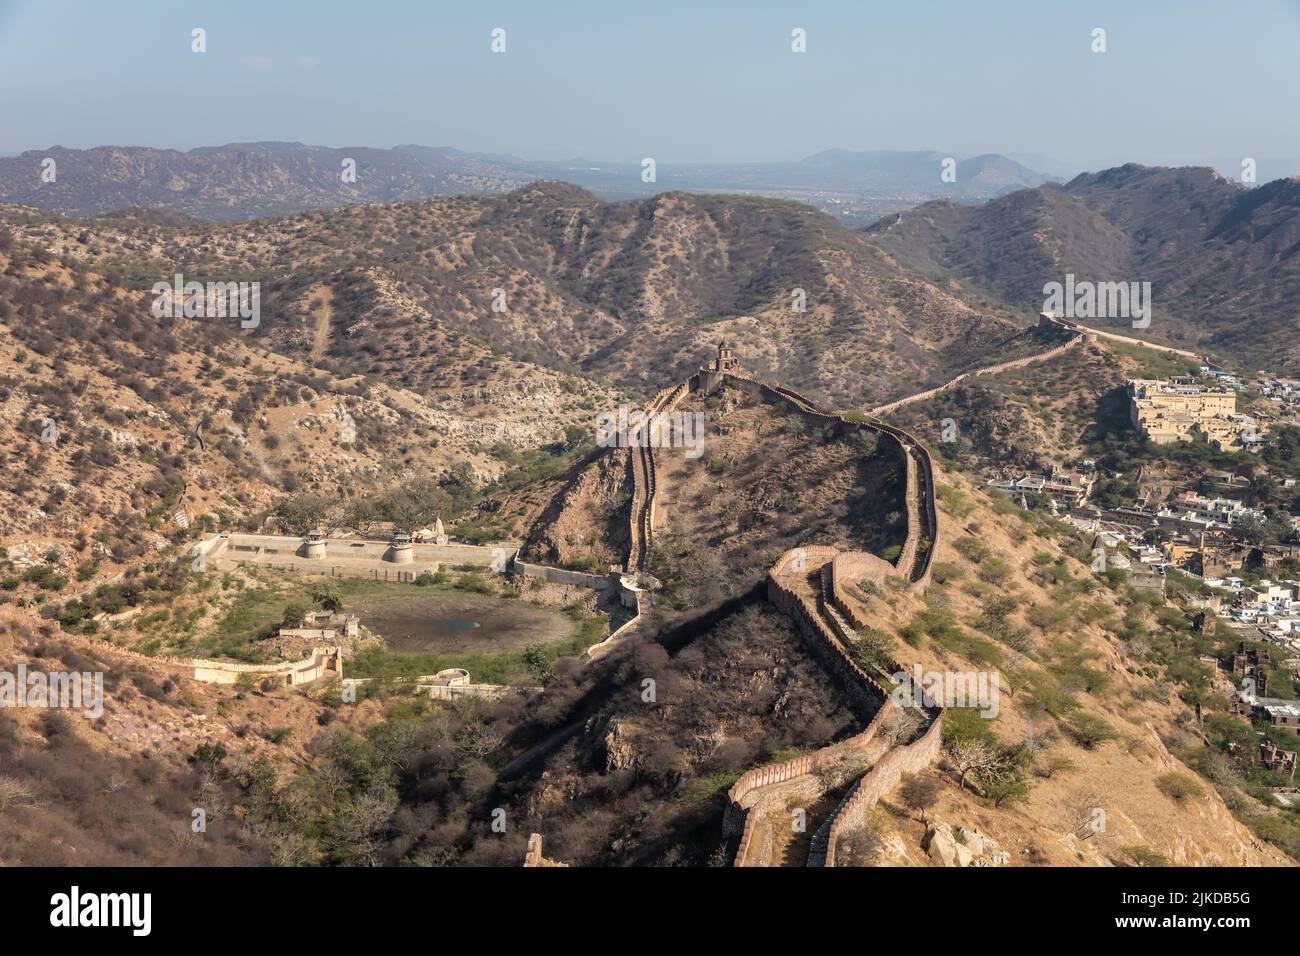 Fort walls in the hills of Jaipur, India. Stock Photo